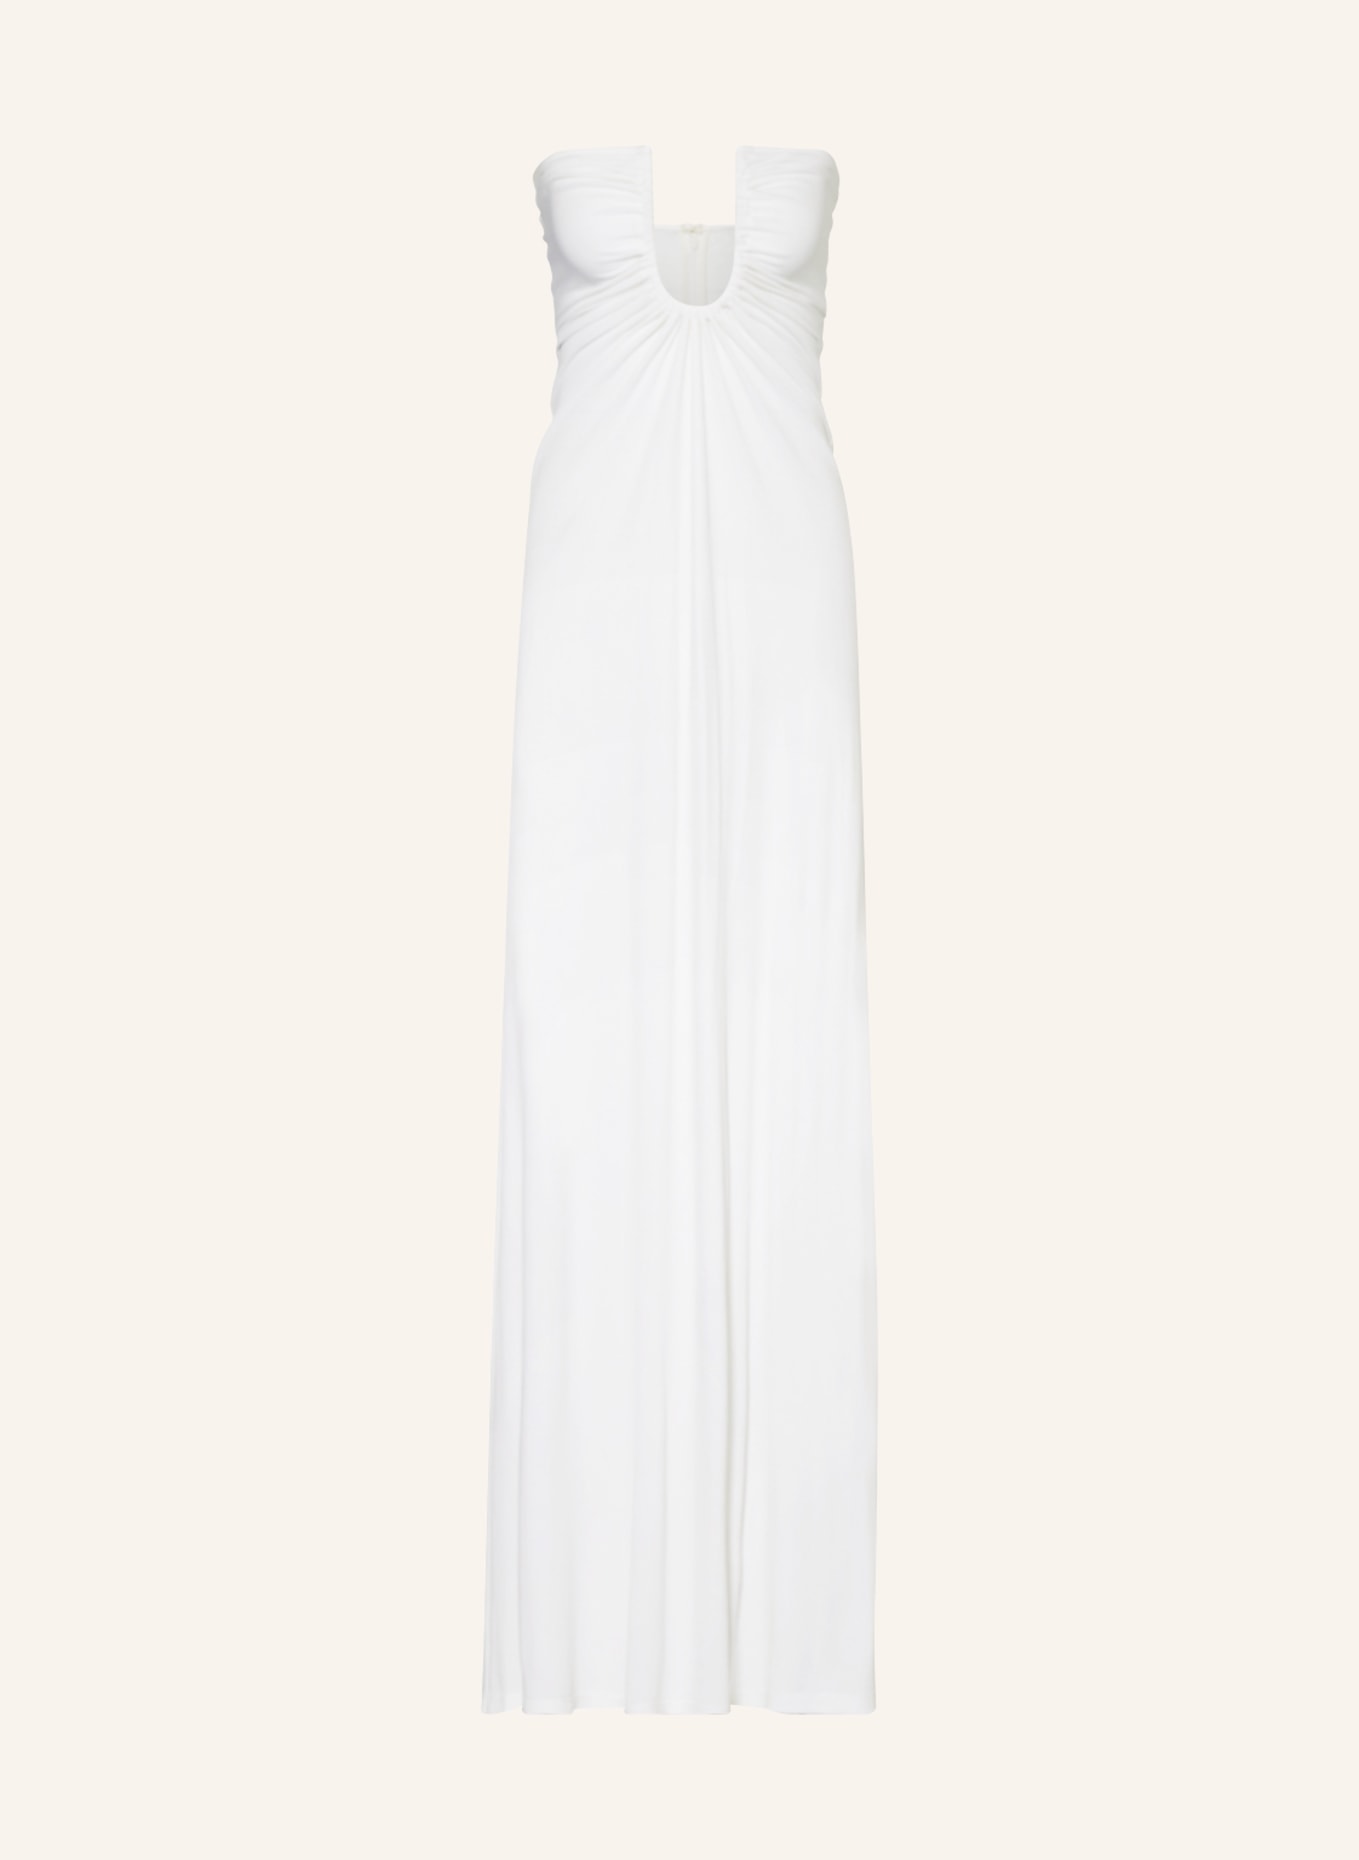 Christopher Esber Arced column dress is stocked in a size 4